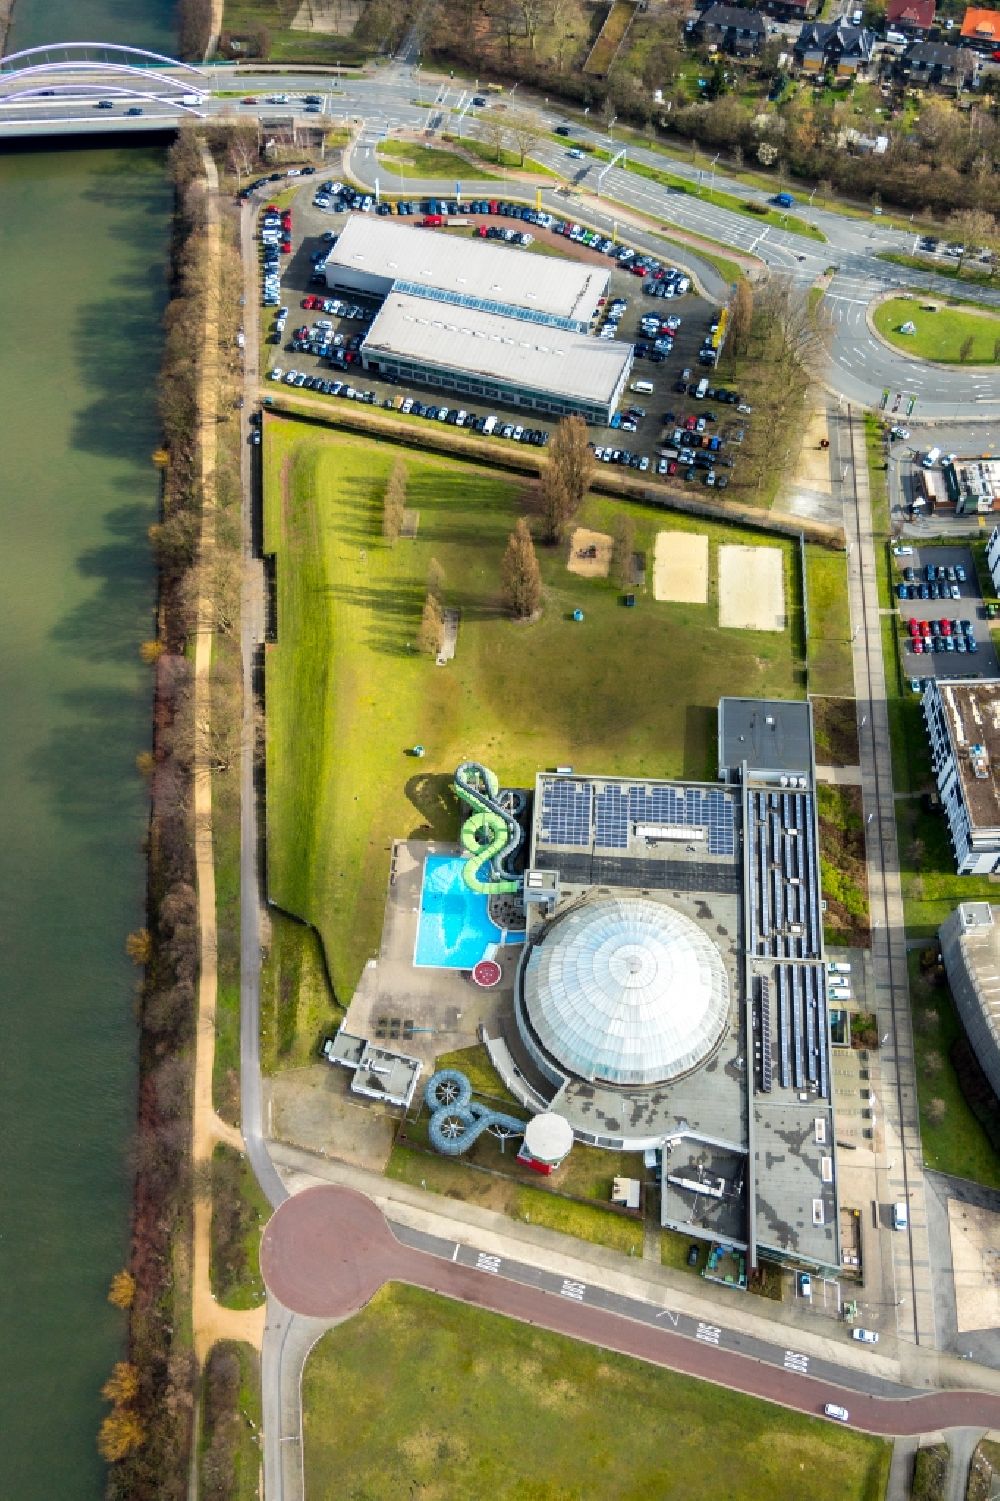 Vertical aerial photograph Oberhausen - Vertical aerial view from the satellite perspective of the spa and swimming pool at the outdoor pool of the recreational facility AQUApark Oberhausen and the marina Marina Oberhausen in Oberhausen in the state of North Rhine-Westphalia, Germany